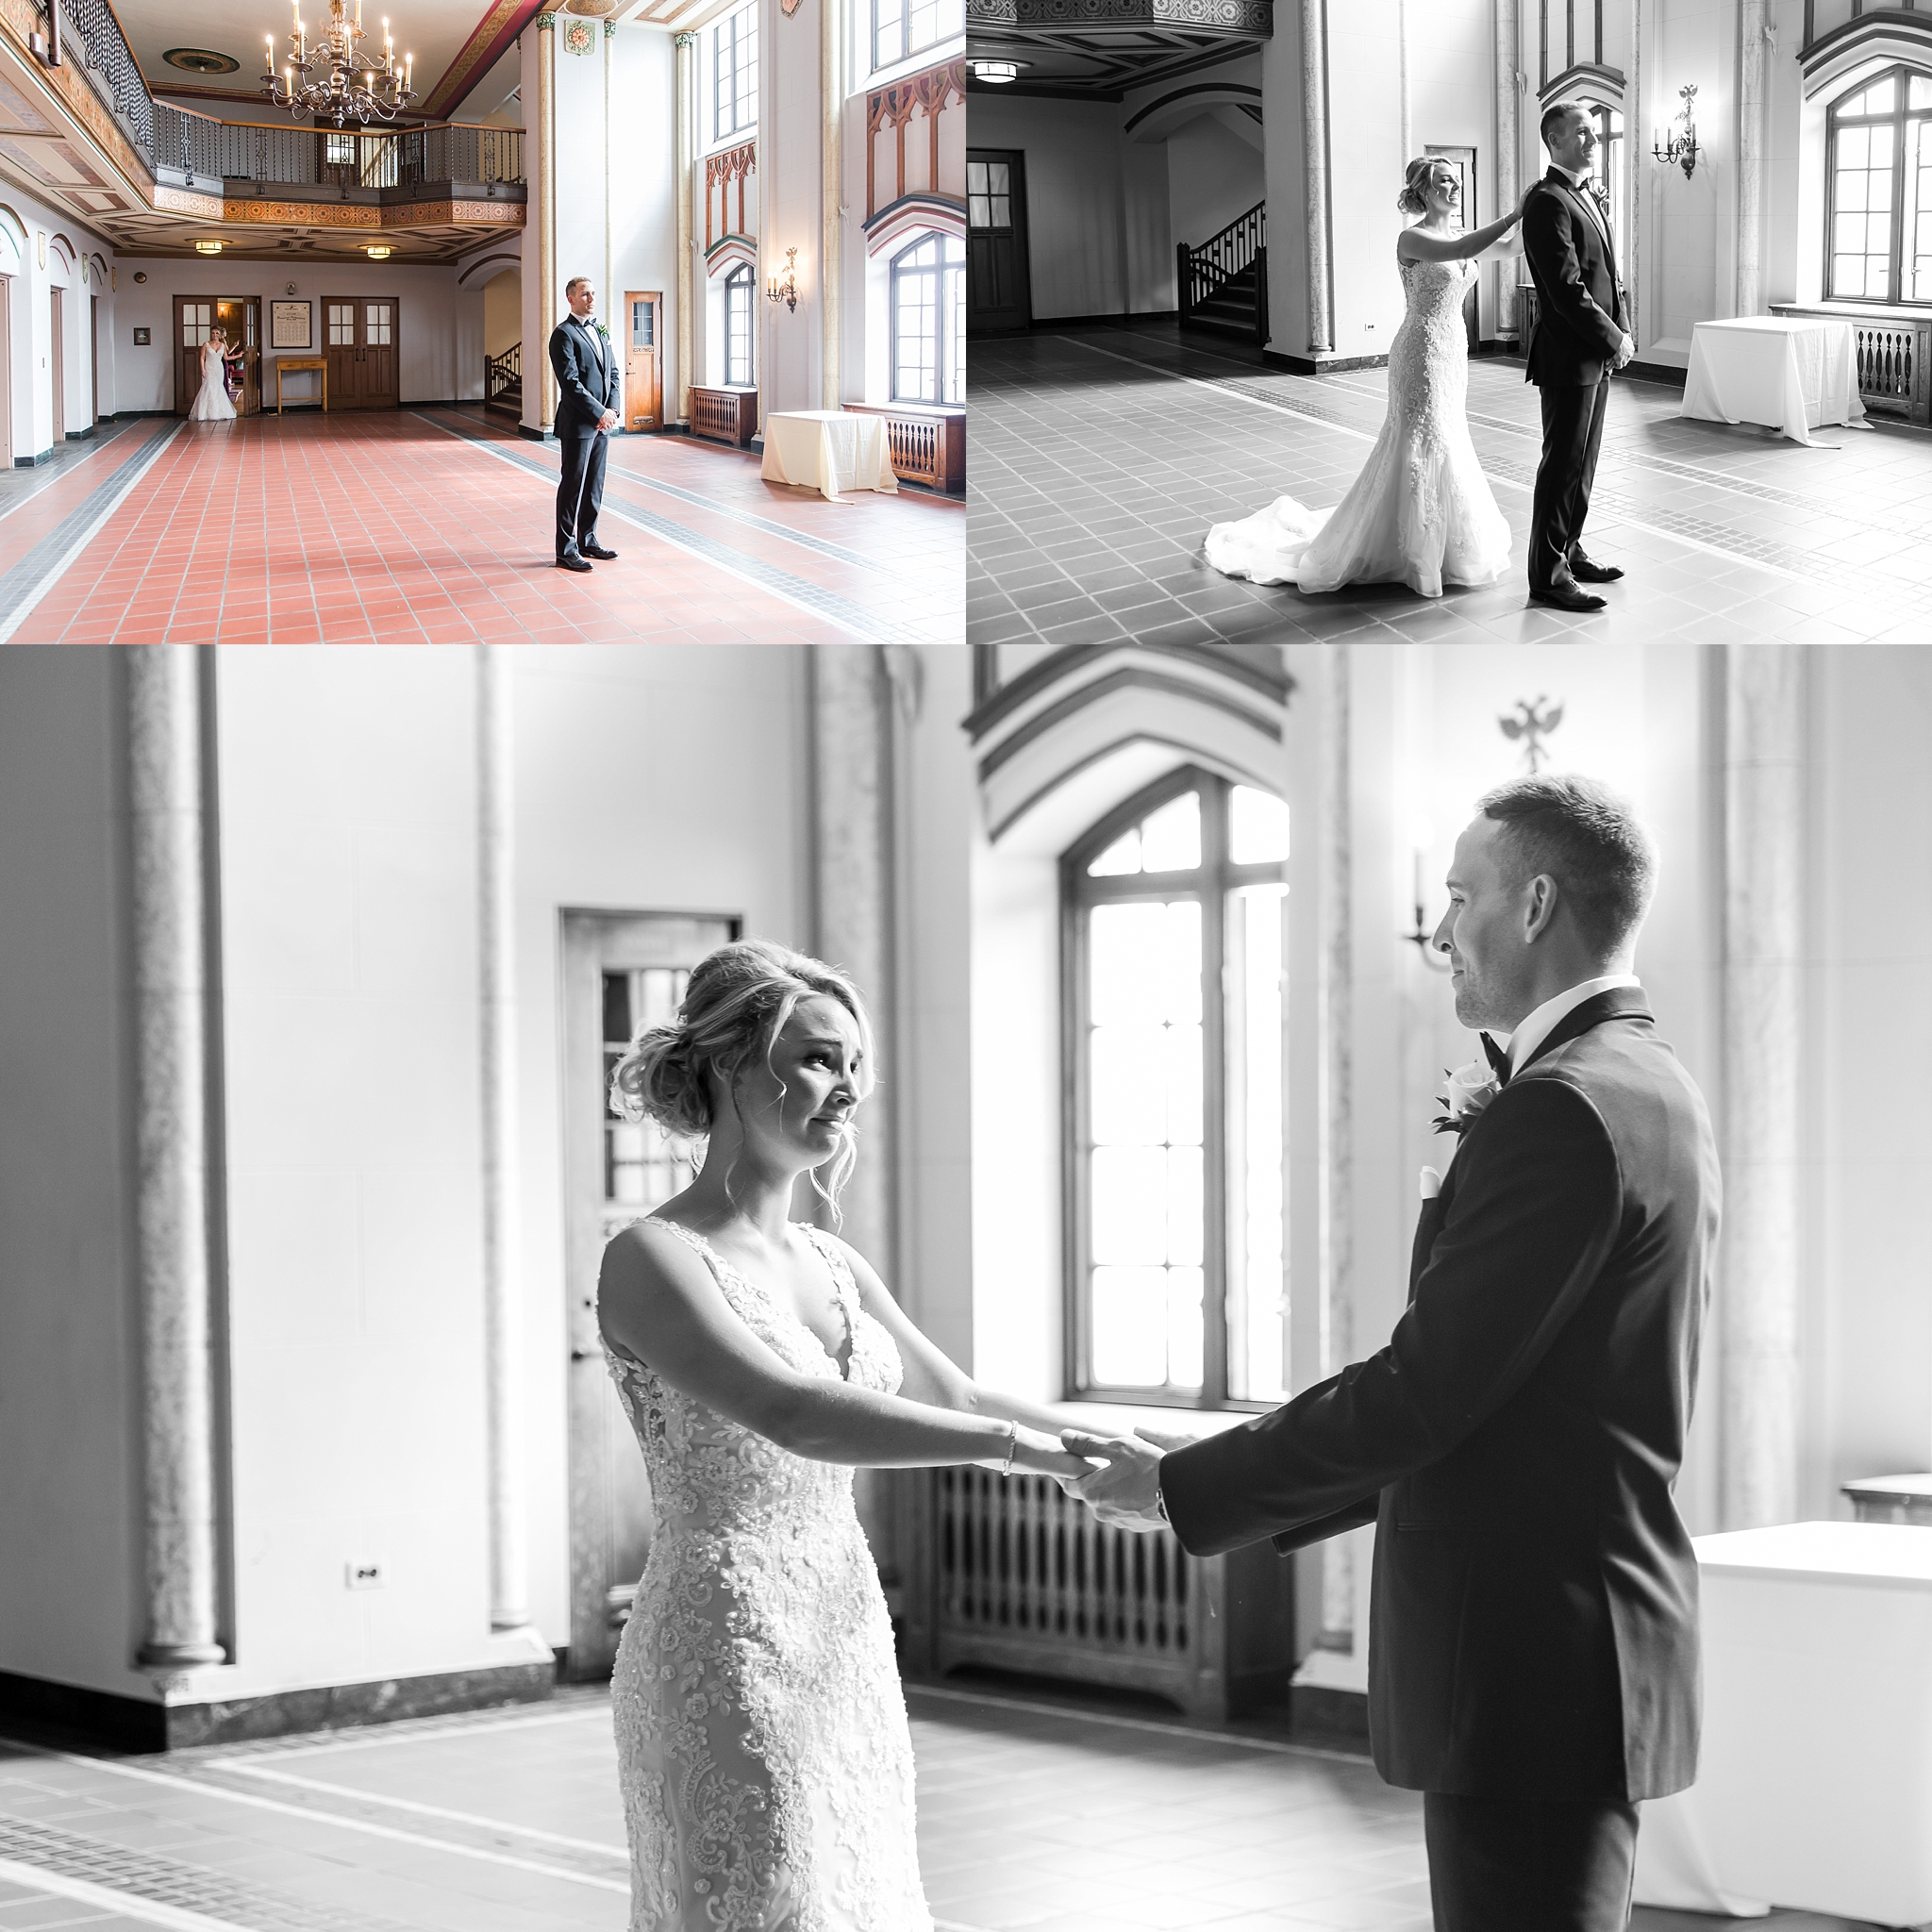 candid-romantic-wedding-photos-at-the-masonic-temple-belle-isle-detroit-institute-of-arts-in-detroit-michigan-by-courtney-carolyn-photography_0020.jpg